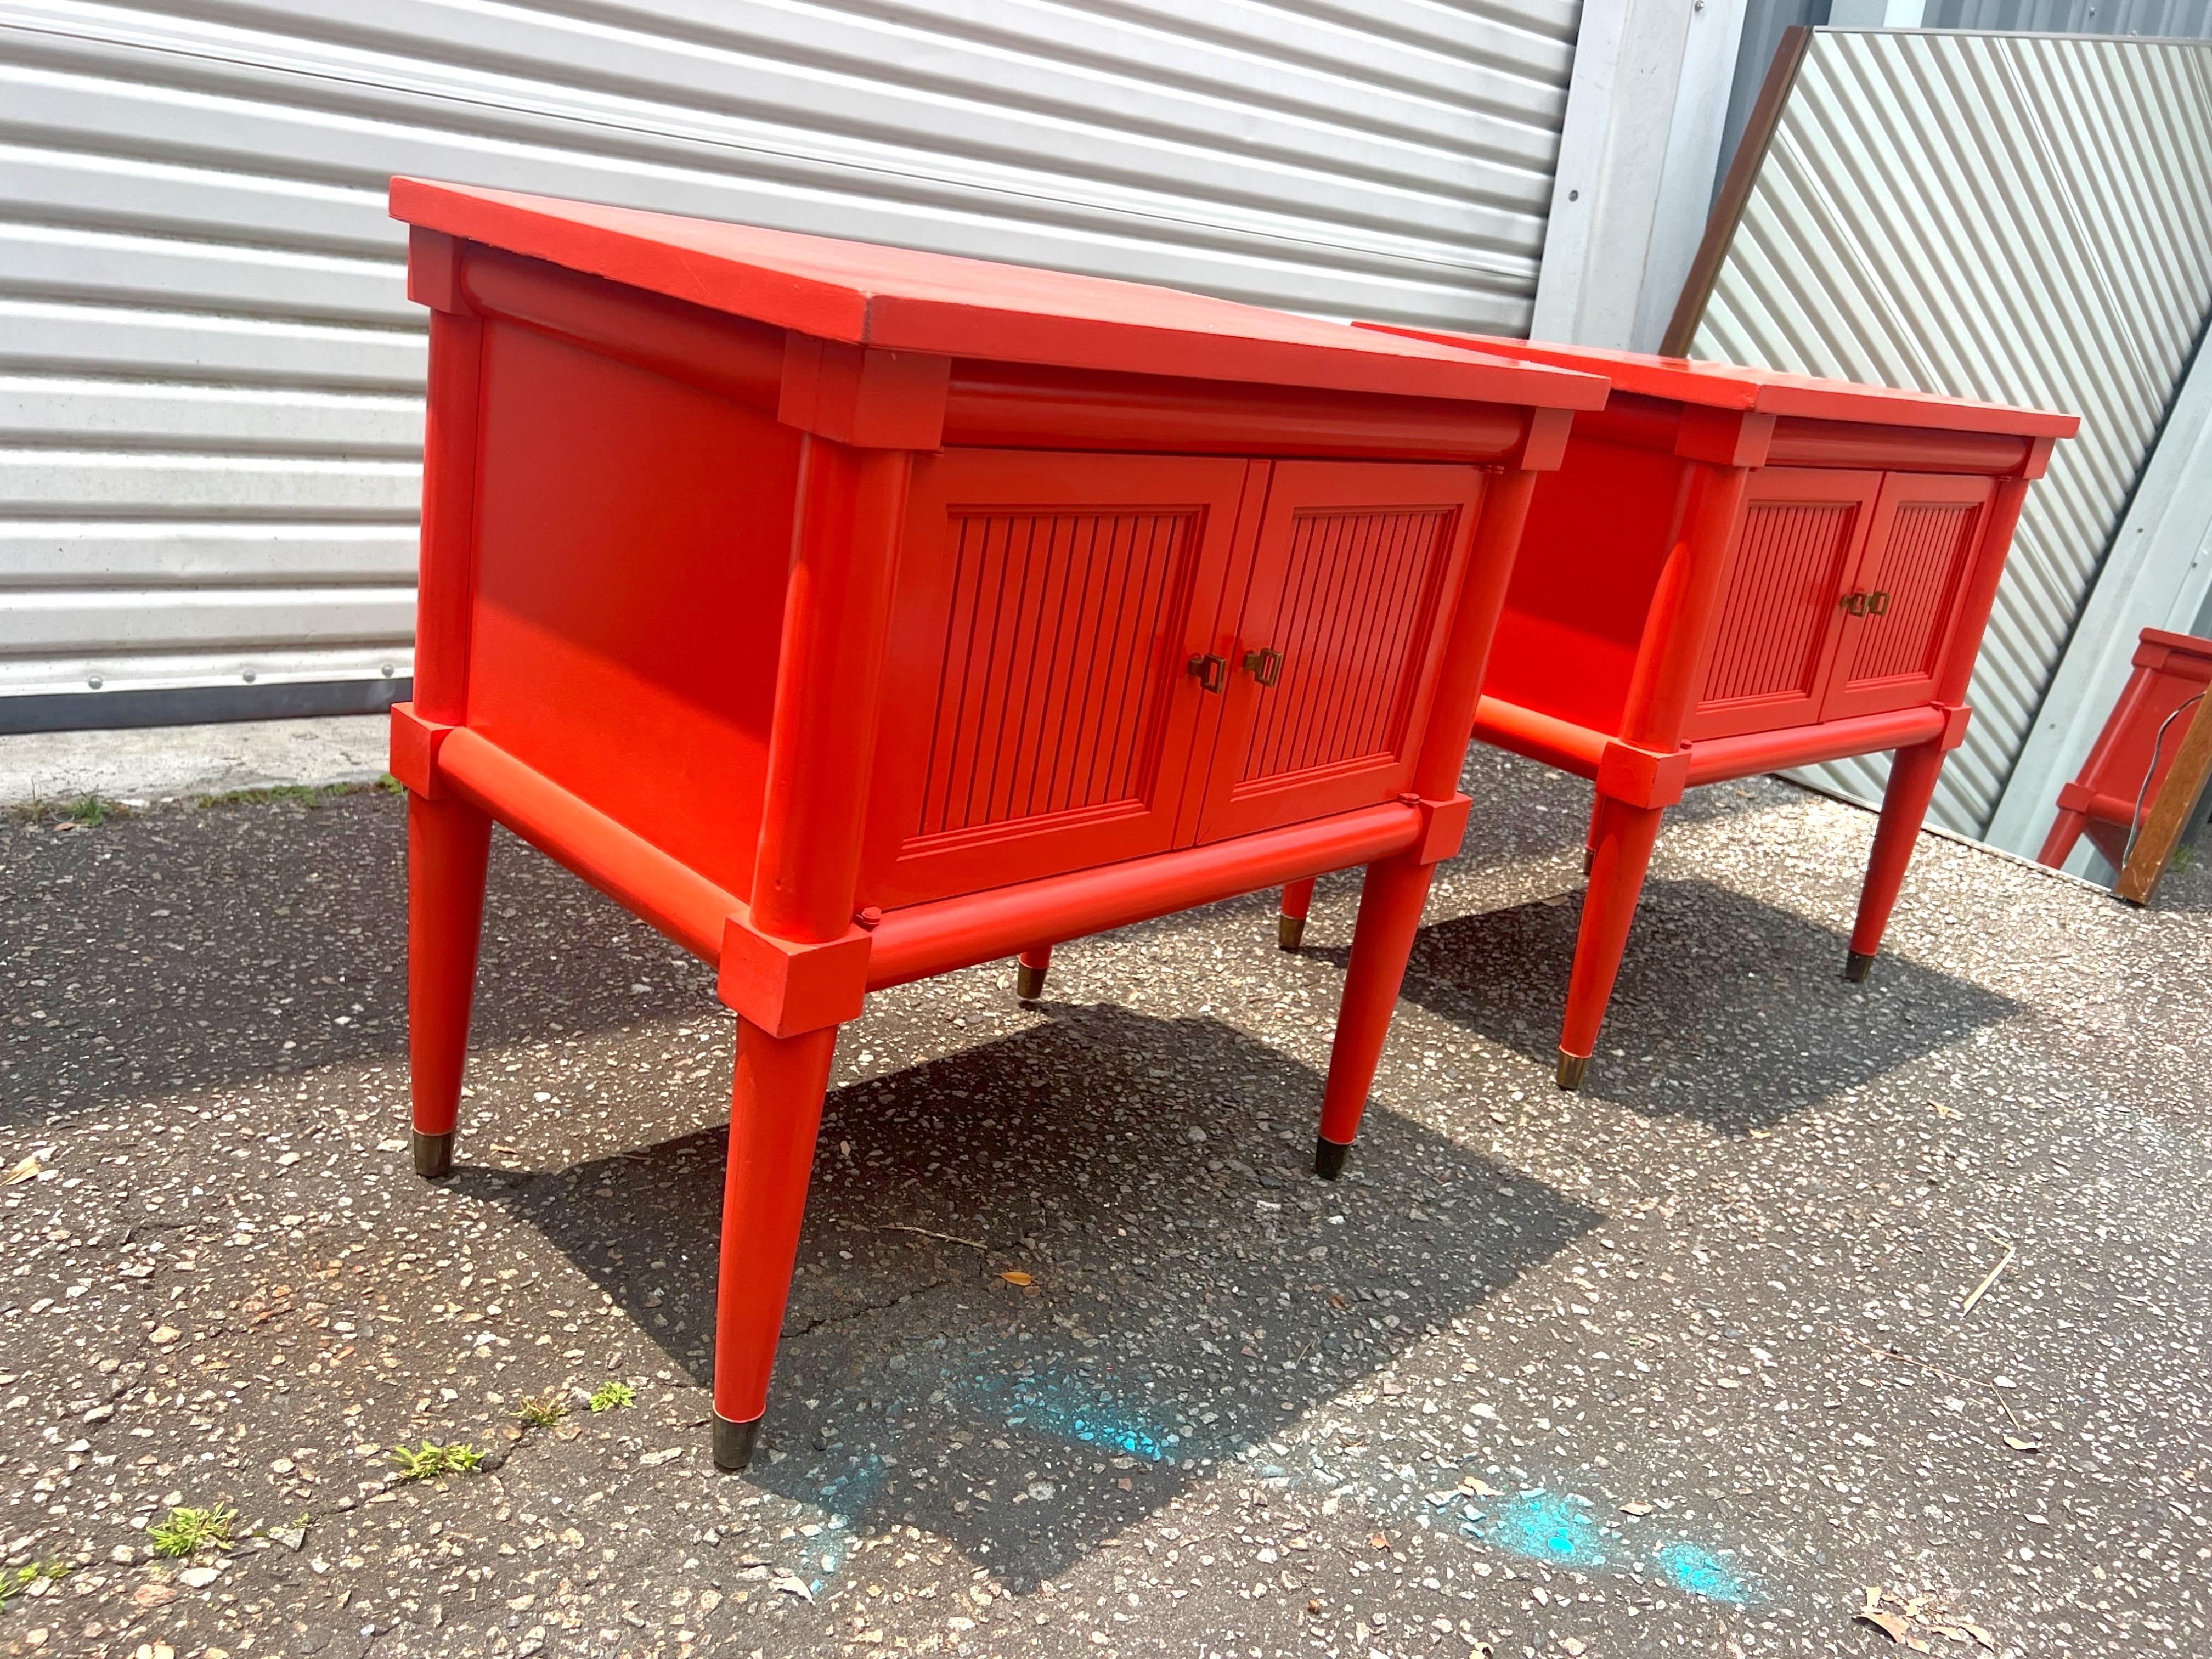 A pair of excellent vintage nightstands lacquered in a high gloss finish. Color matched to Benjamin Moore’s Tomato Red “A radiant orange-red that beams with confidence.” Nightstands circa 1970s.